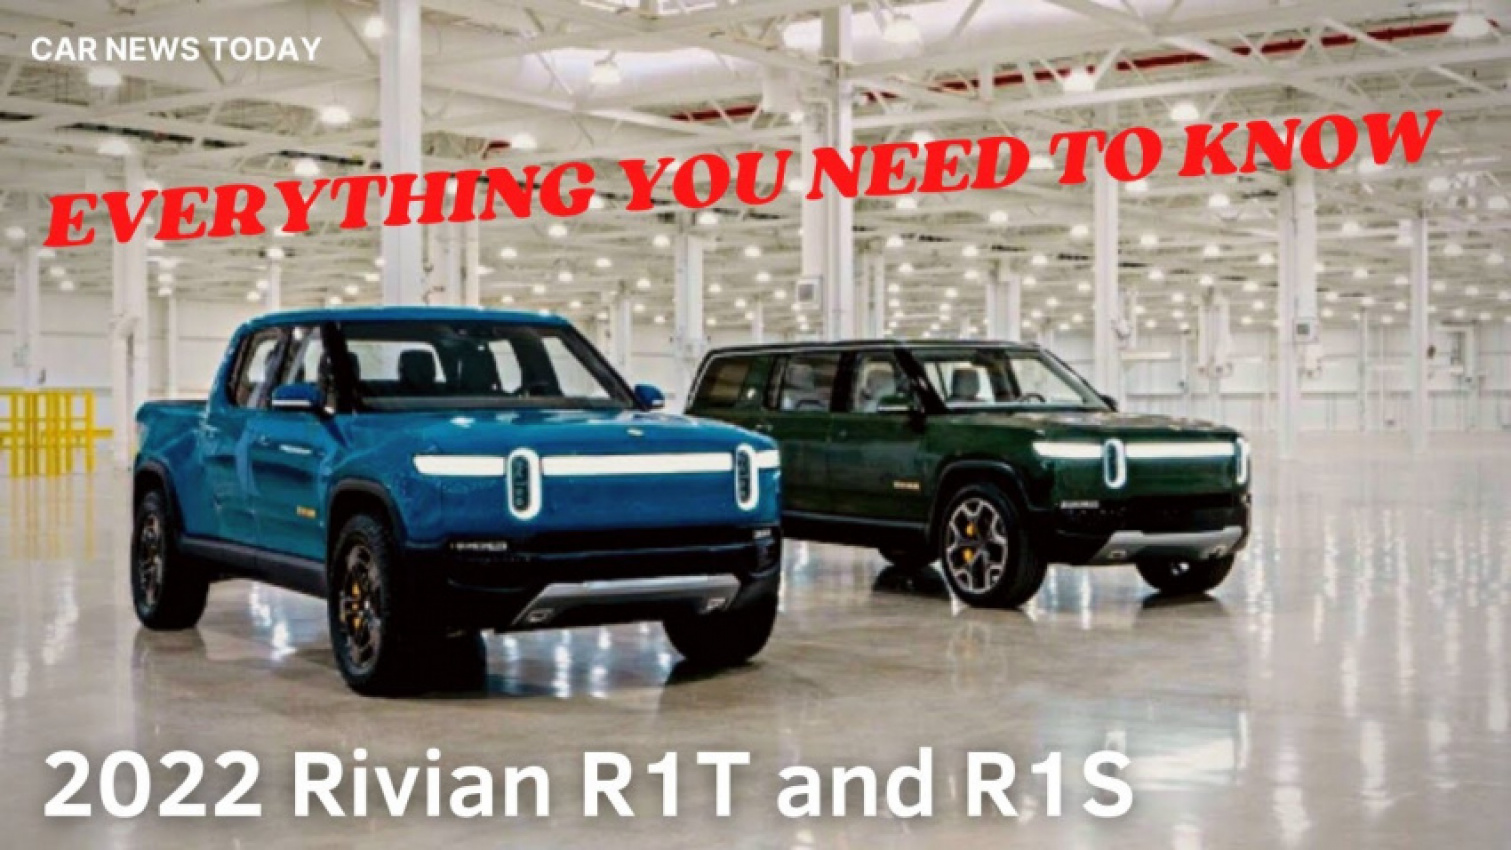 auto, autos, cars, rivian, car news today, cars, comparison, electric vehicles, elon musk, r1t vs r1s, rivian r1s, rivian r1s interior, rivian r1s range, rivian r1s review, rivian r1s suv, rivian r1t, rivian r1t and r1s review, rivian r1t range, rivian review, rivian stocks, rivian tank turn, tesla, bad news!! 2022 rivian r1s and r1t | rivian r1s and r1t with max battery packs delayed to 2023